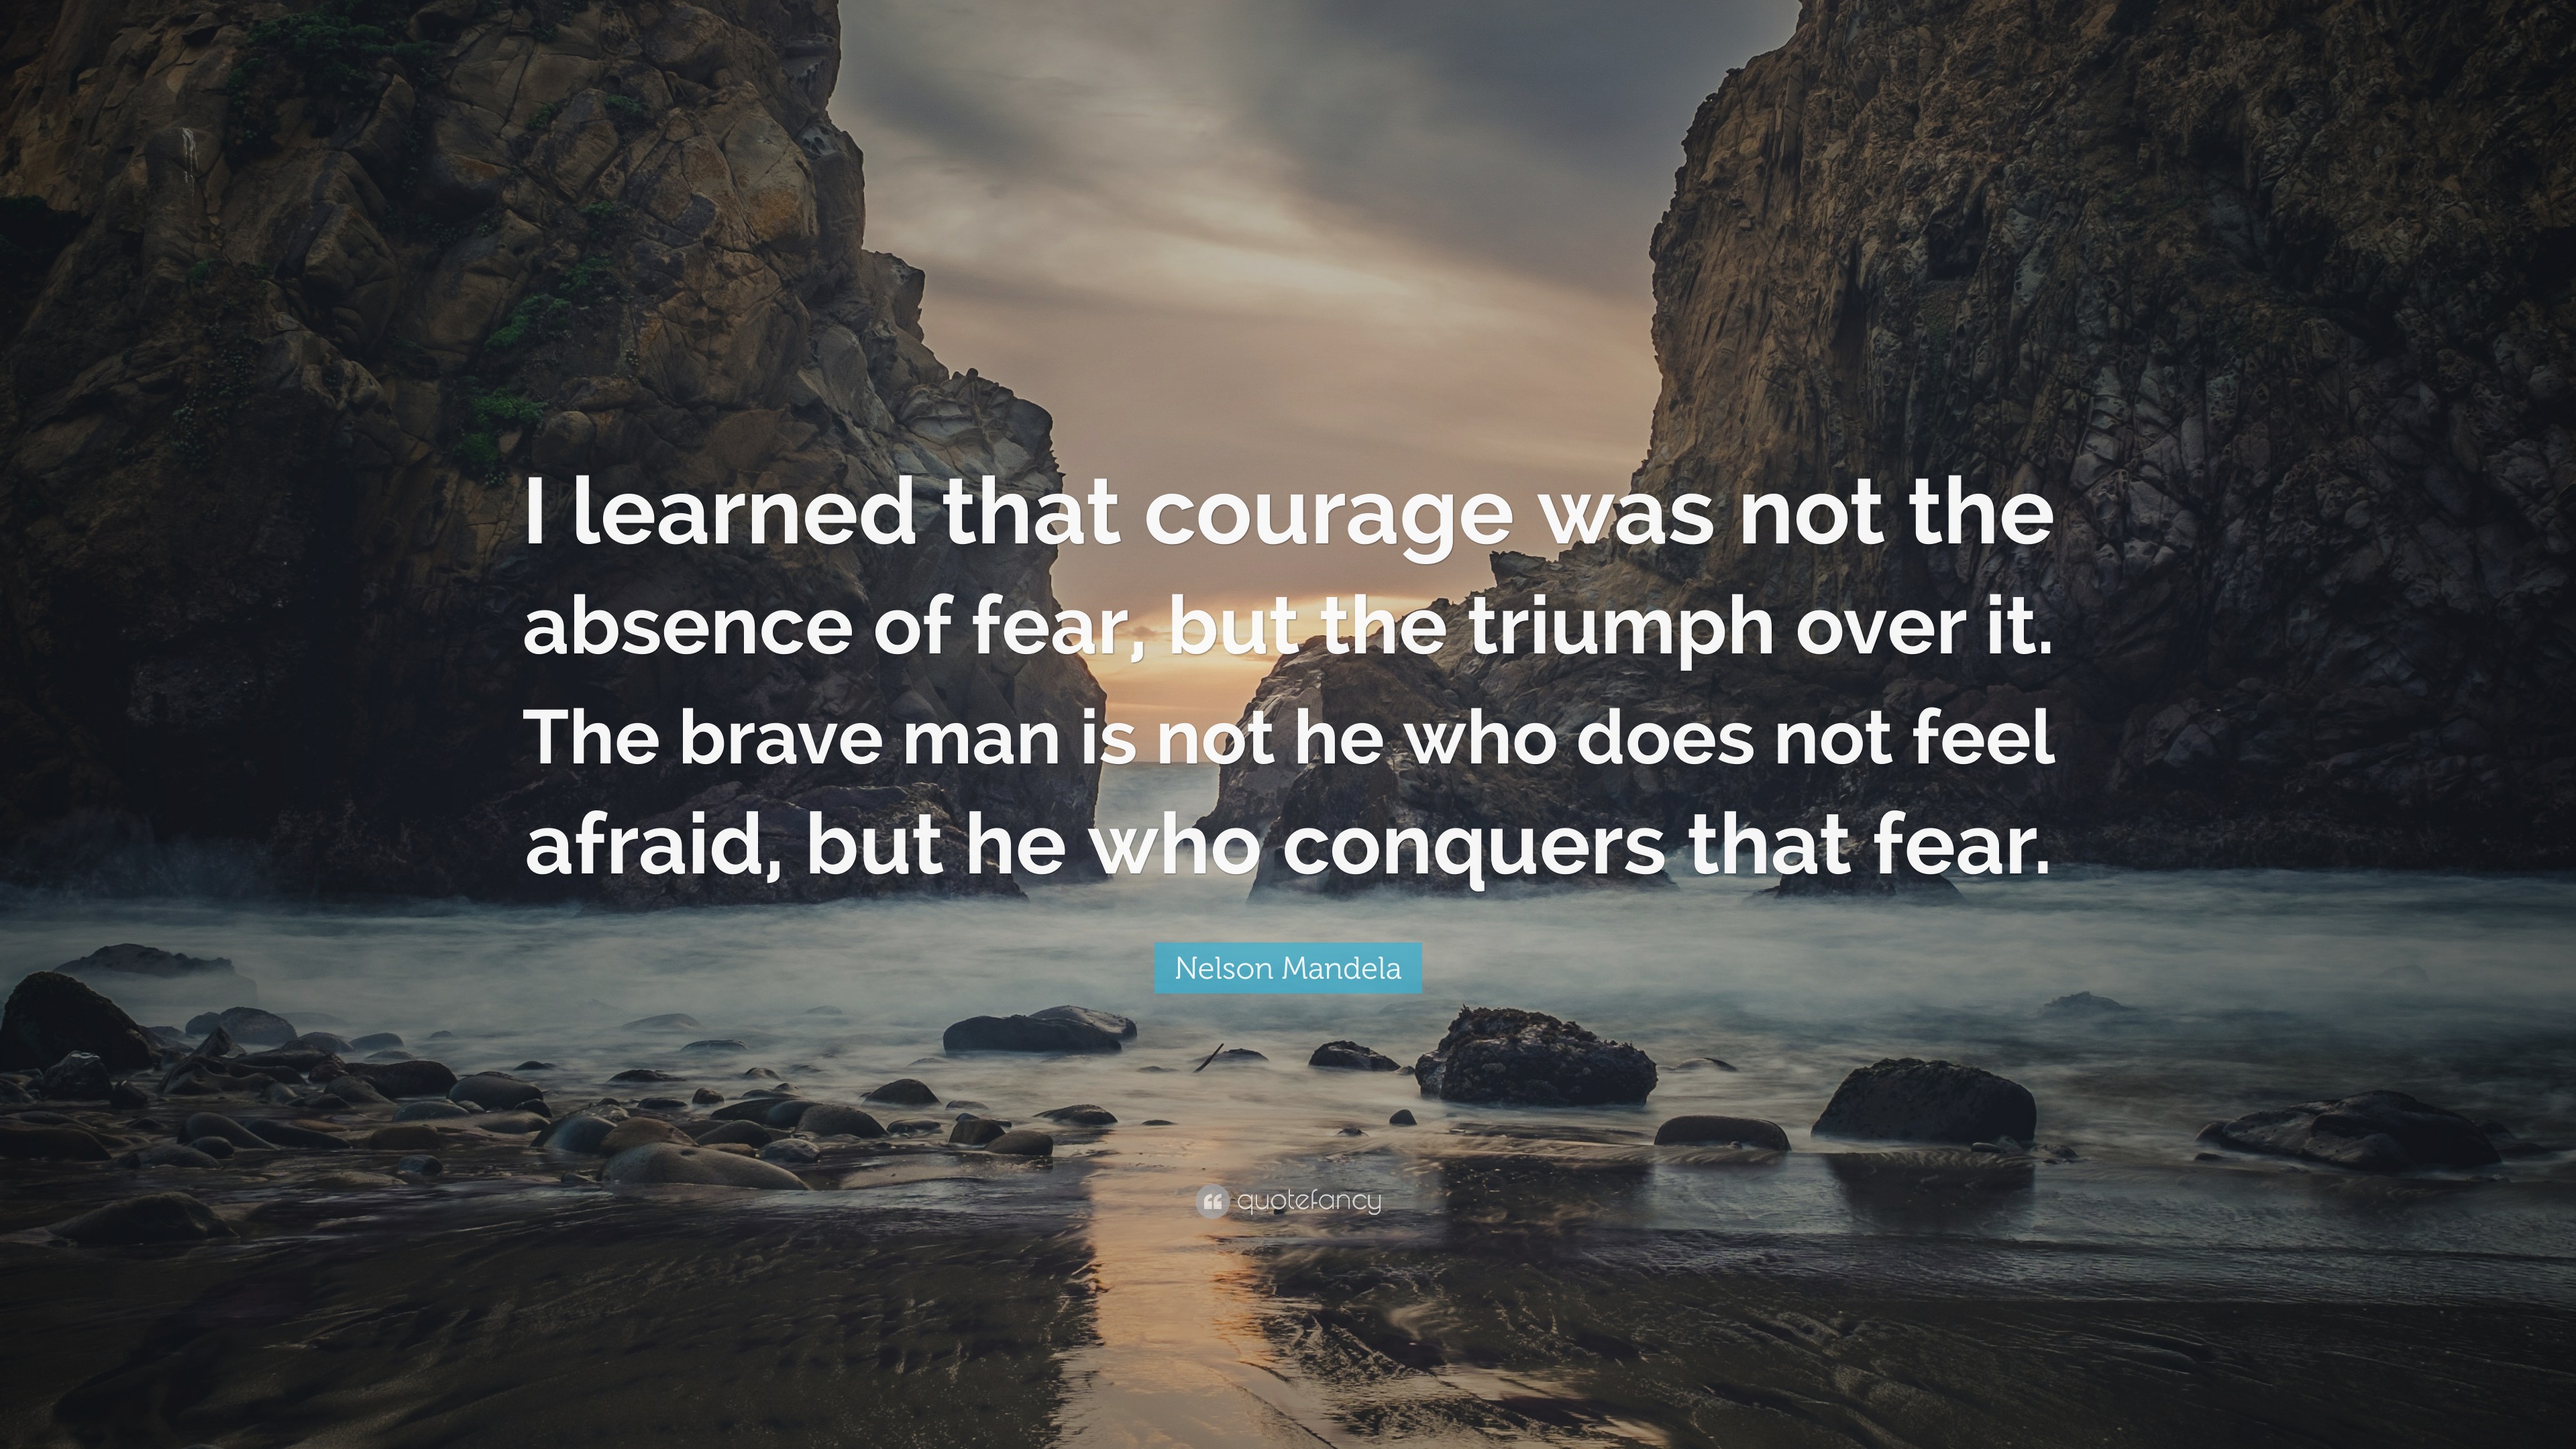 Nelson Mandela Quote: "I learned that courage was not the ...